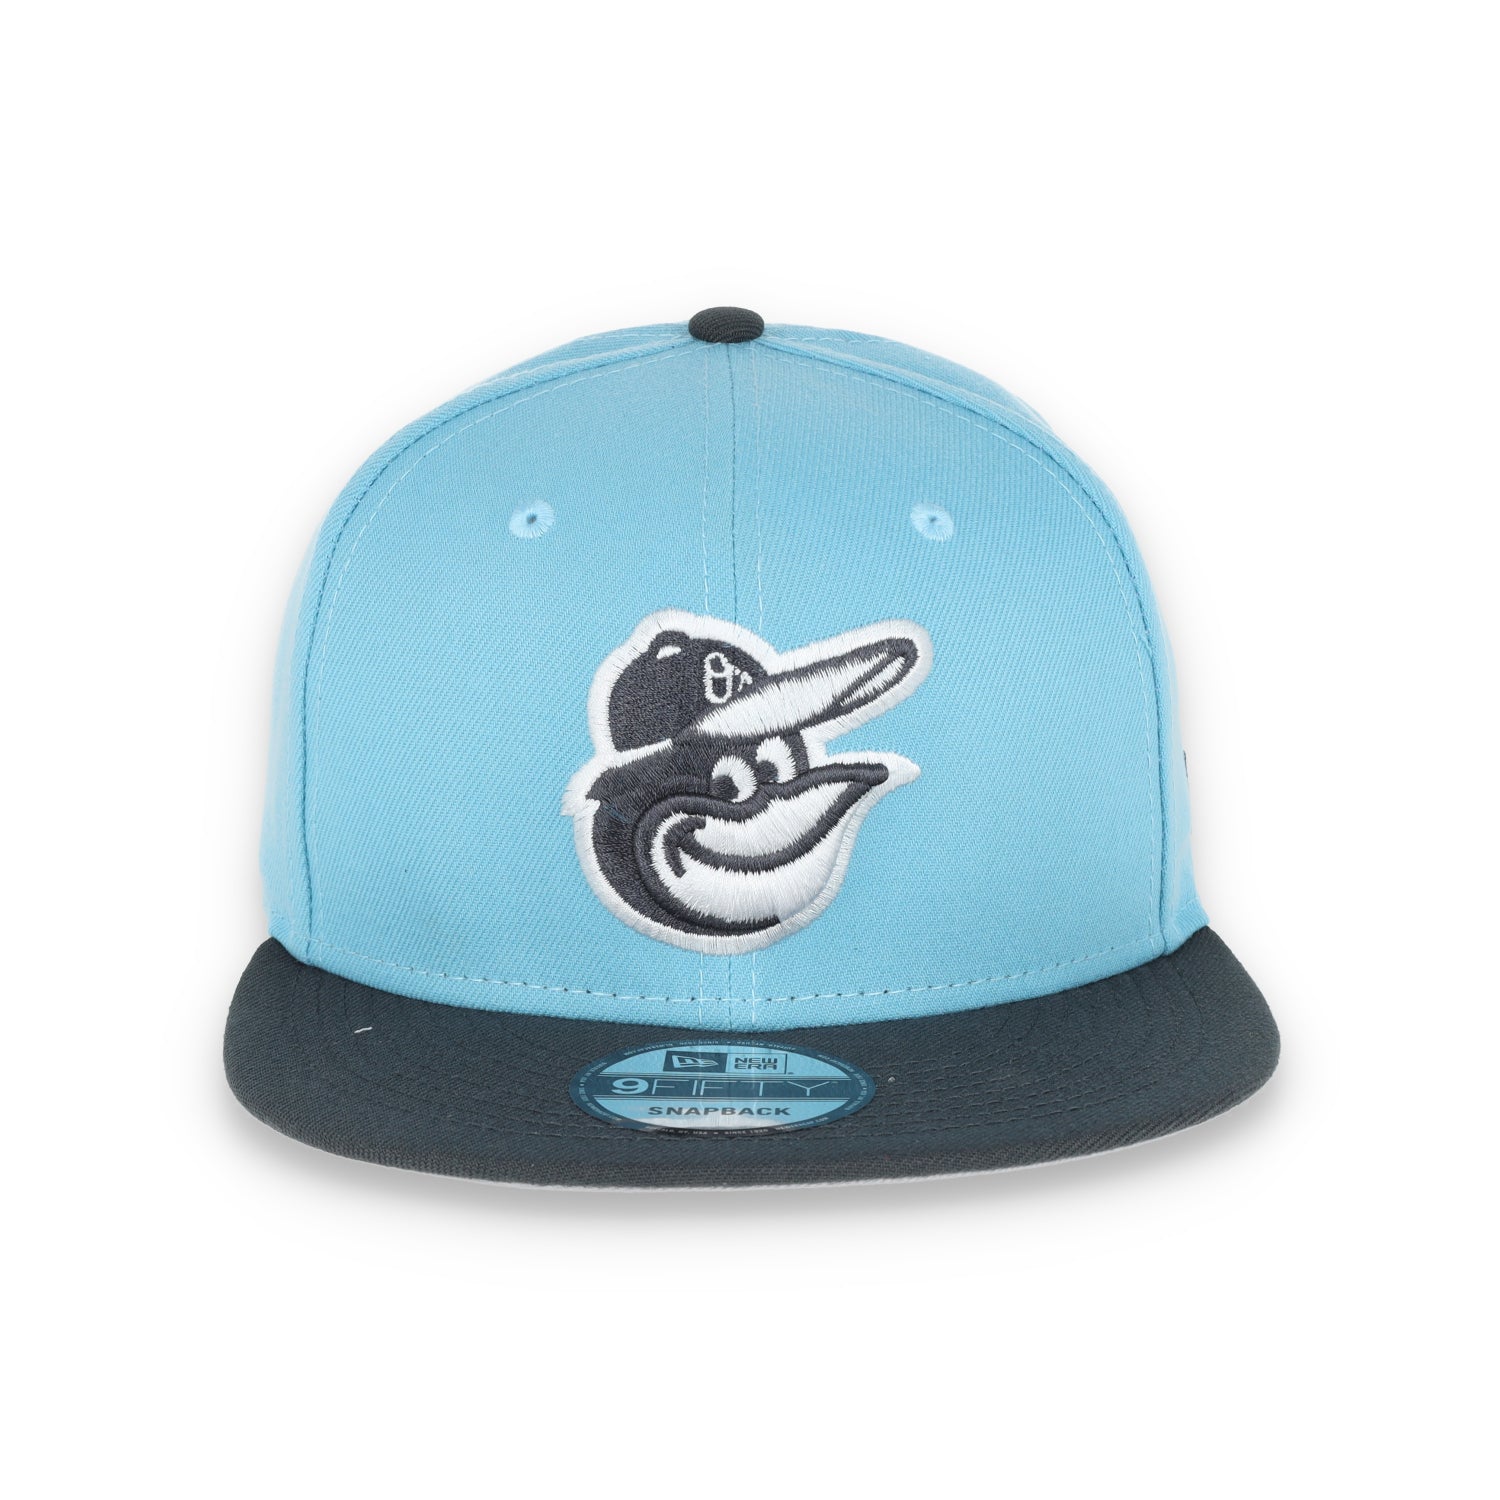 NEW ERA BALTIMORE ORIOLES 9FIFTY COLOR PACK SNAPBACK-BLUE